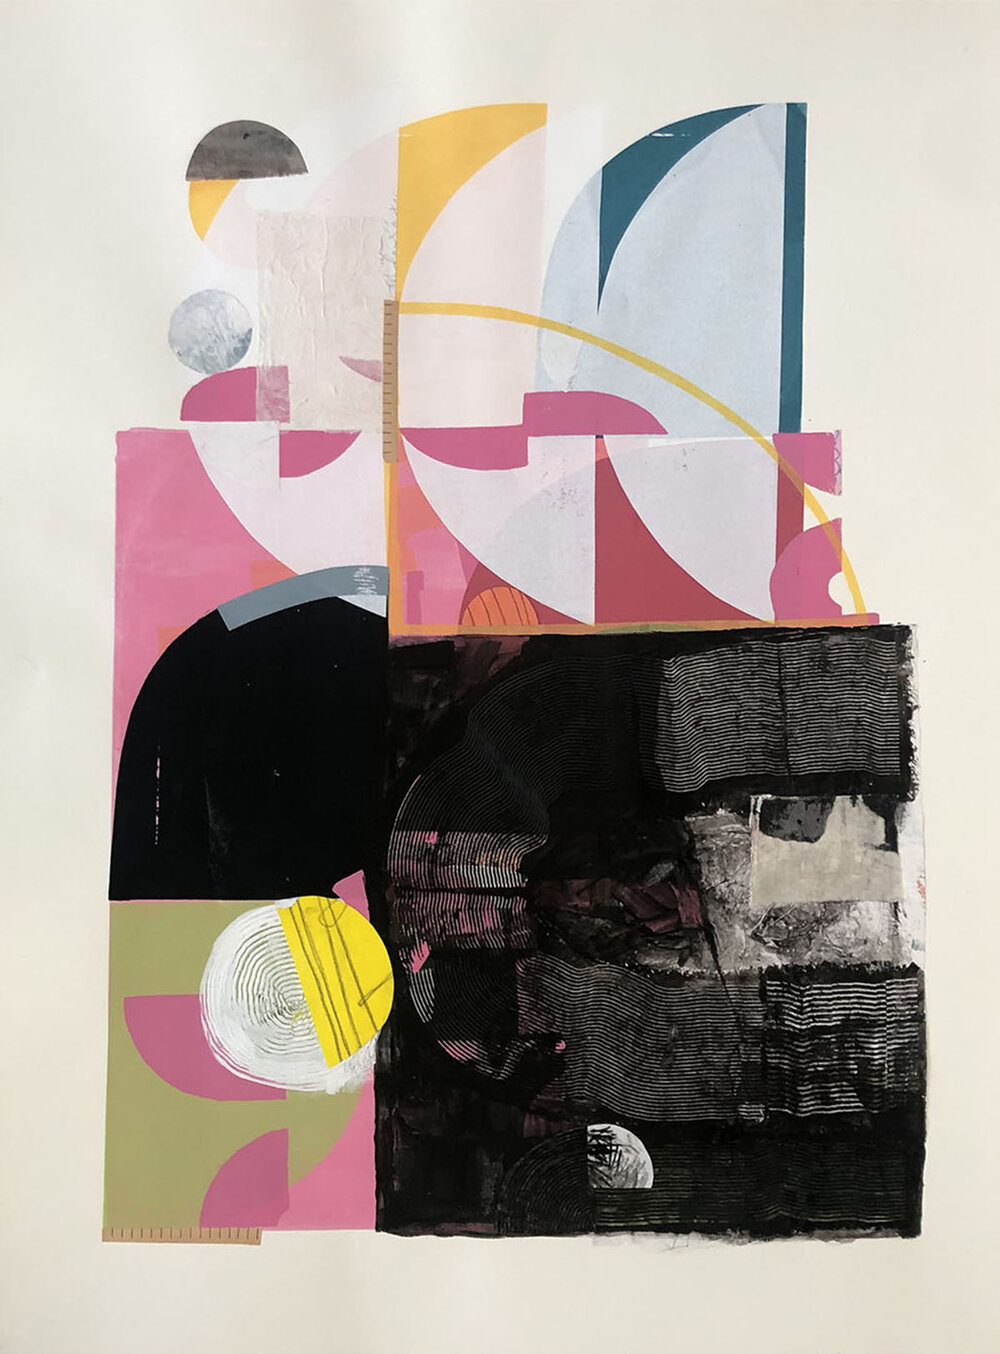   Why Can’t You Hear Me? ,  2020,  Acrylic, flashe vinyl, collage, serigraphy, canvas, graphite on paper, 30 x 22 inches 